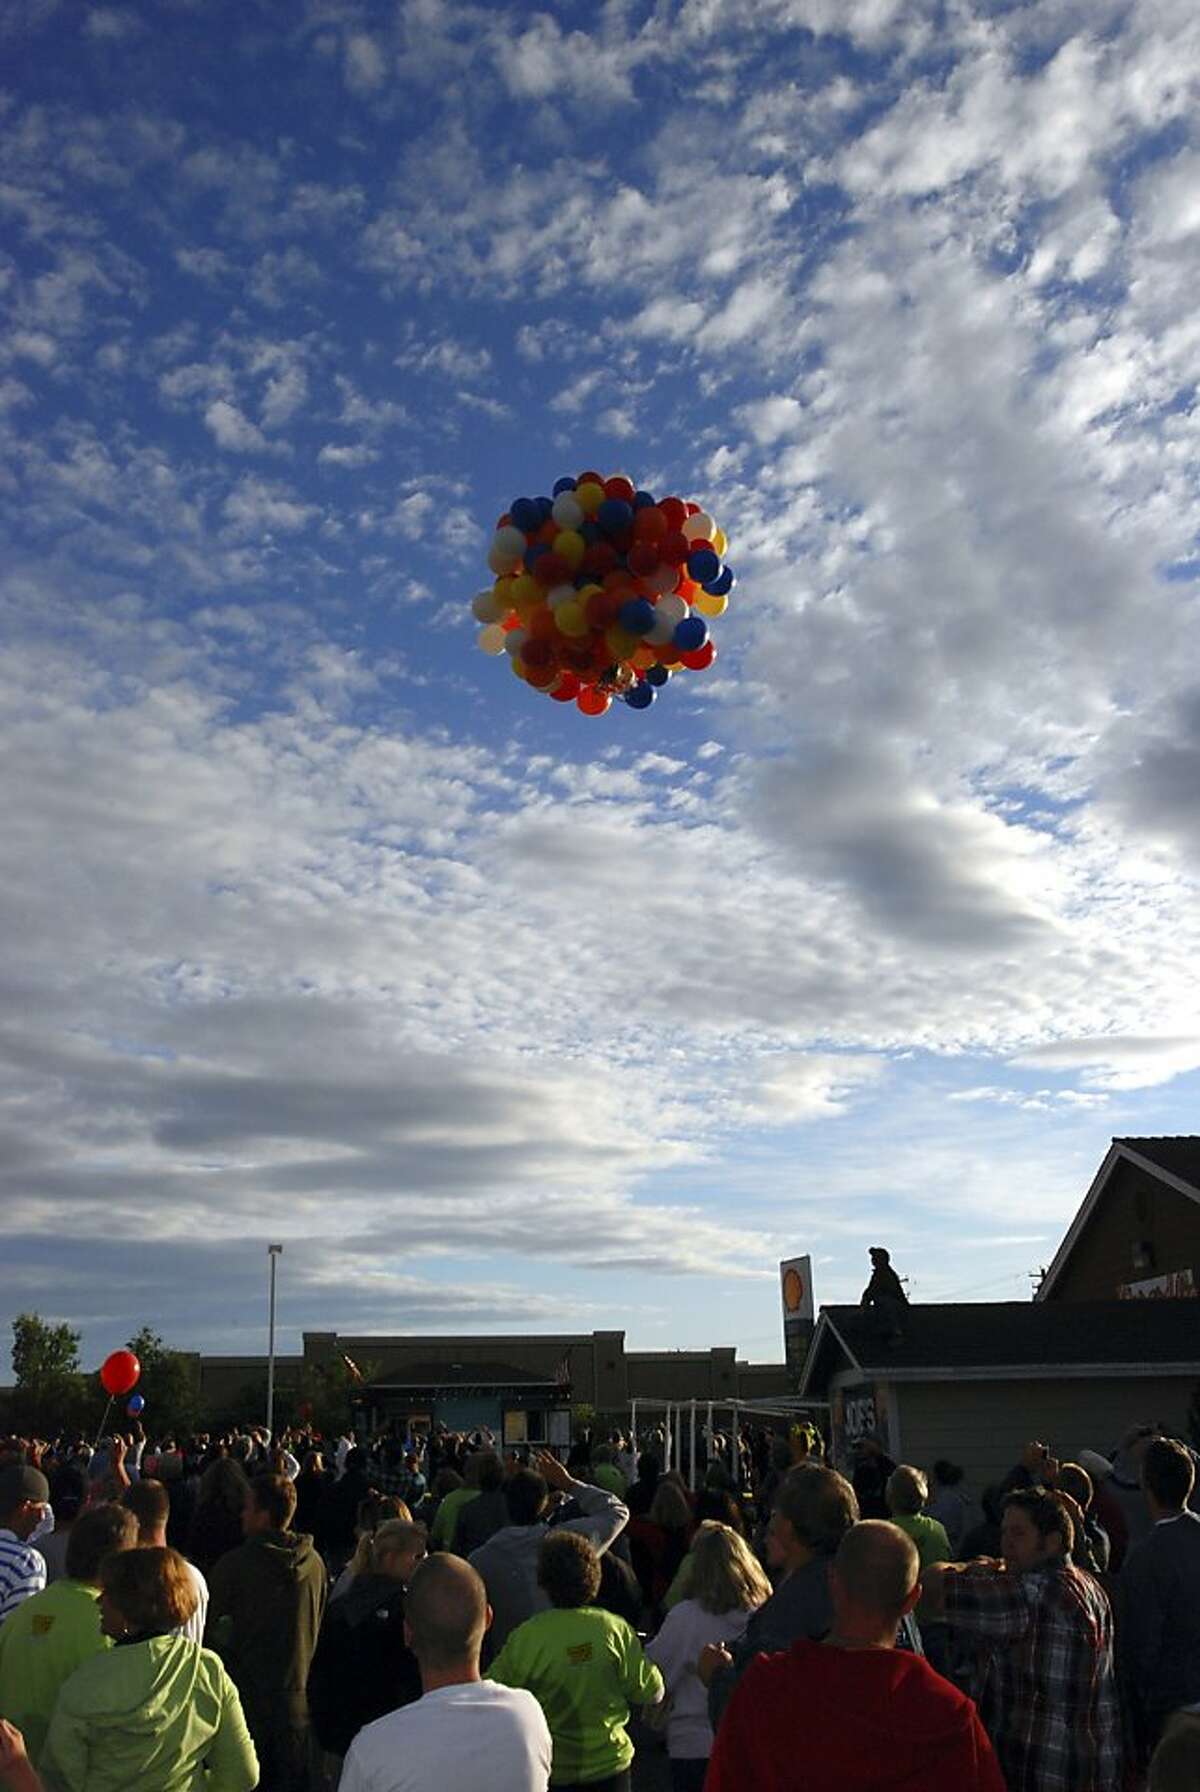 Lawn Chair Balloonists Halted By Storms